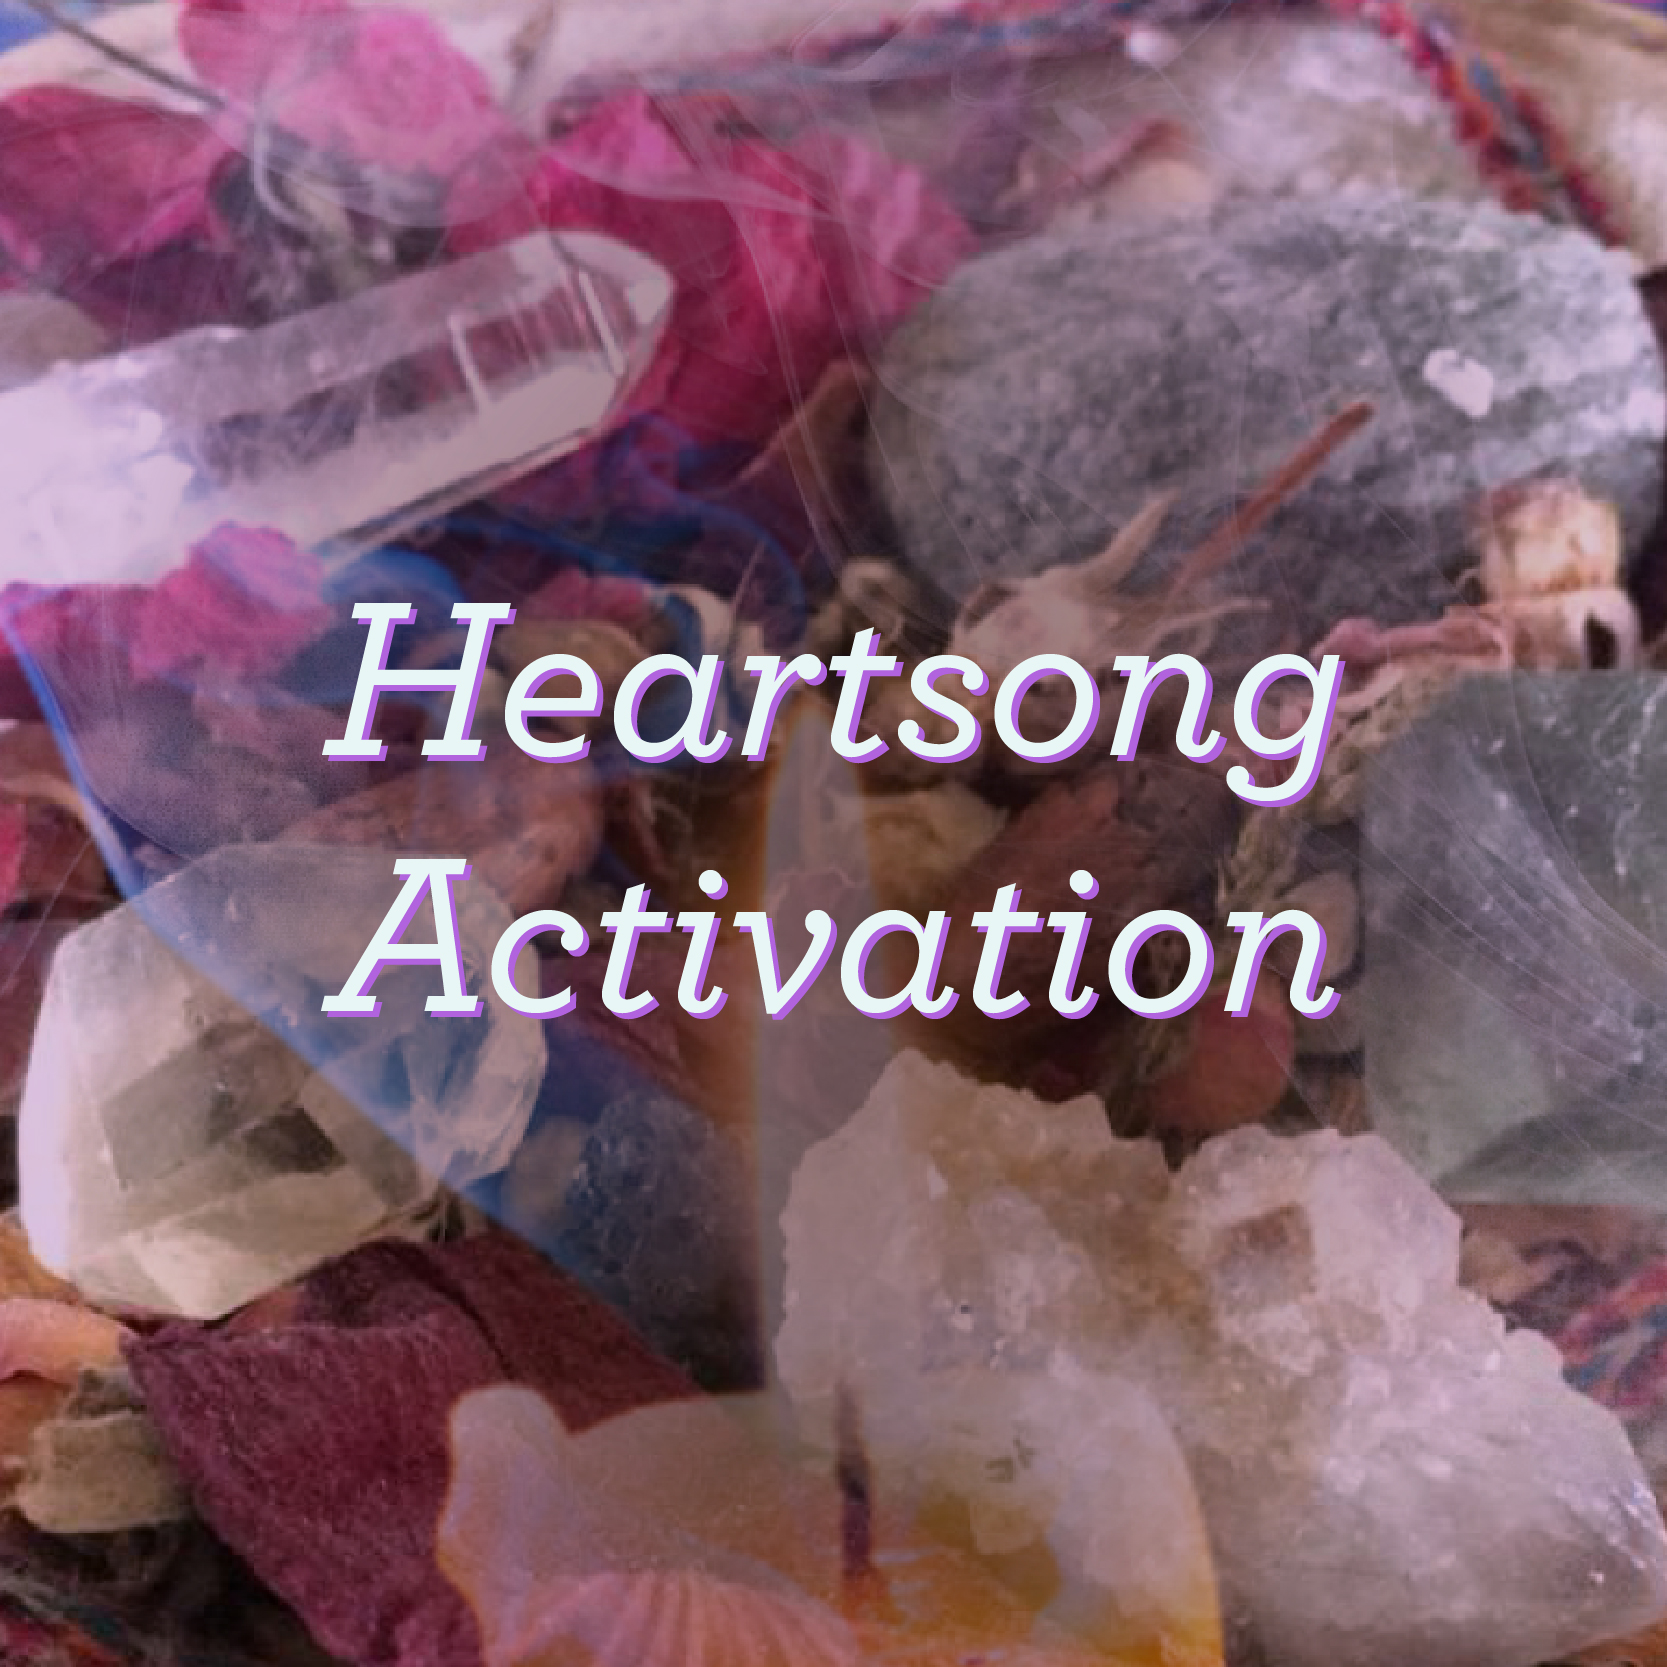 Heartsong Activation FREE Sound Meditation (download)